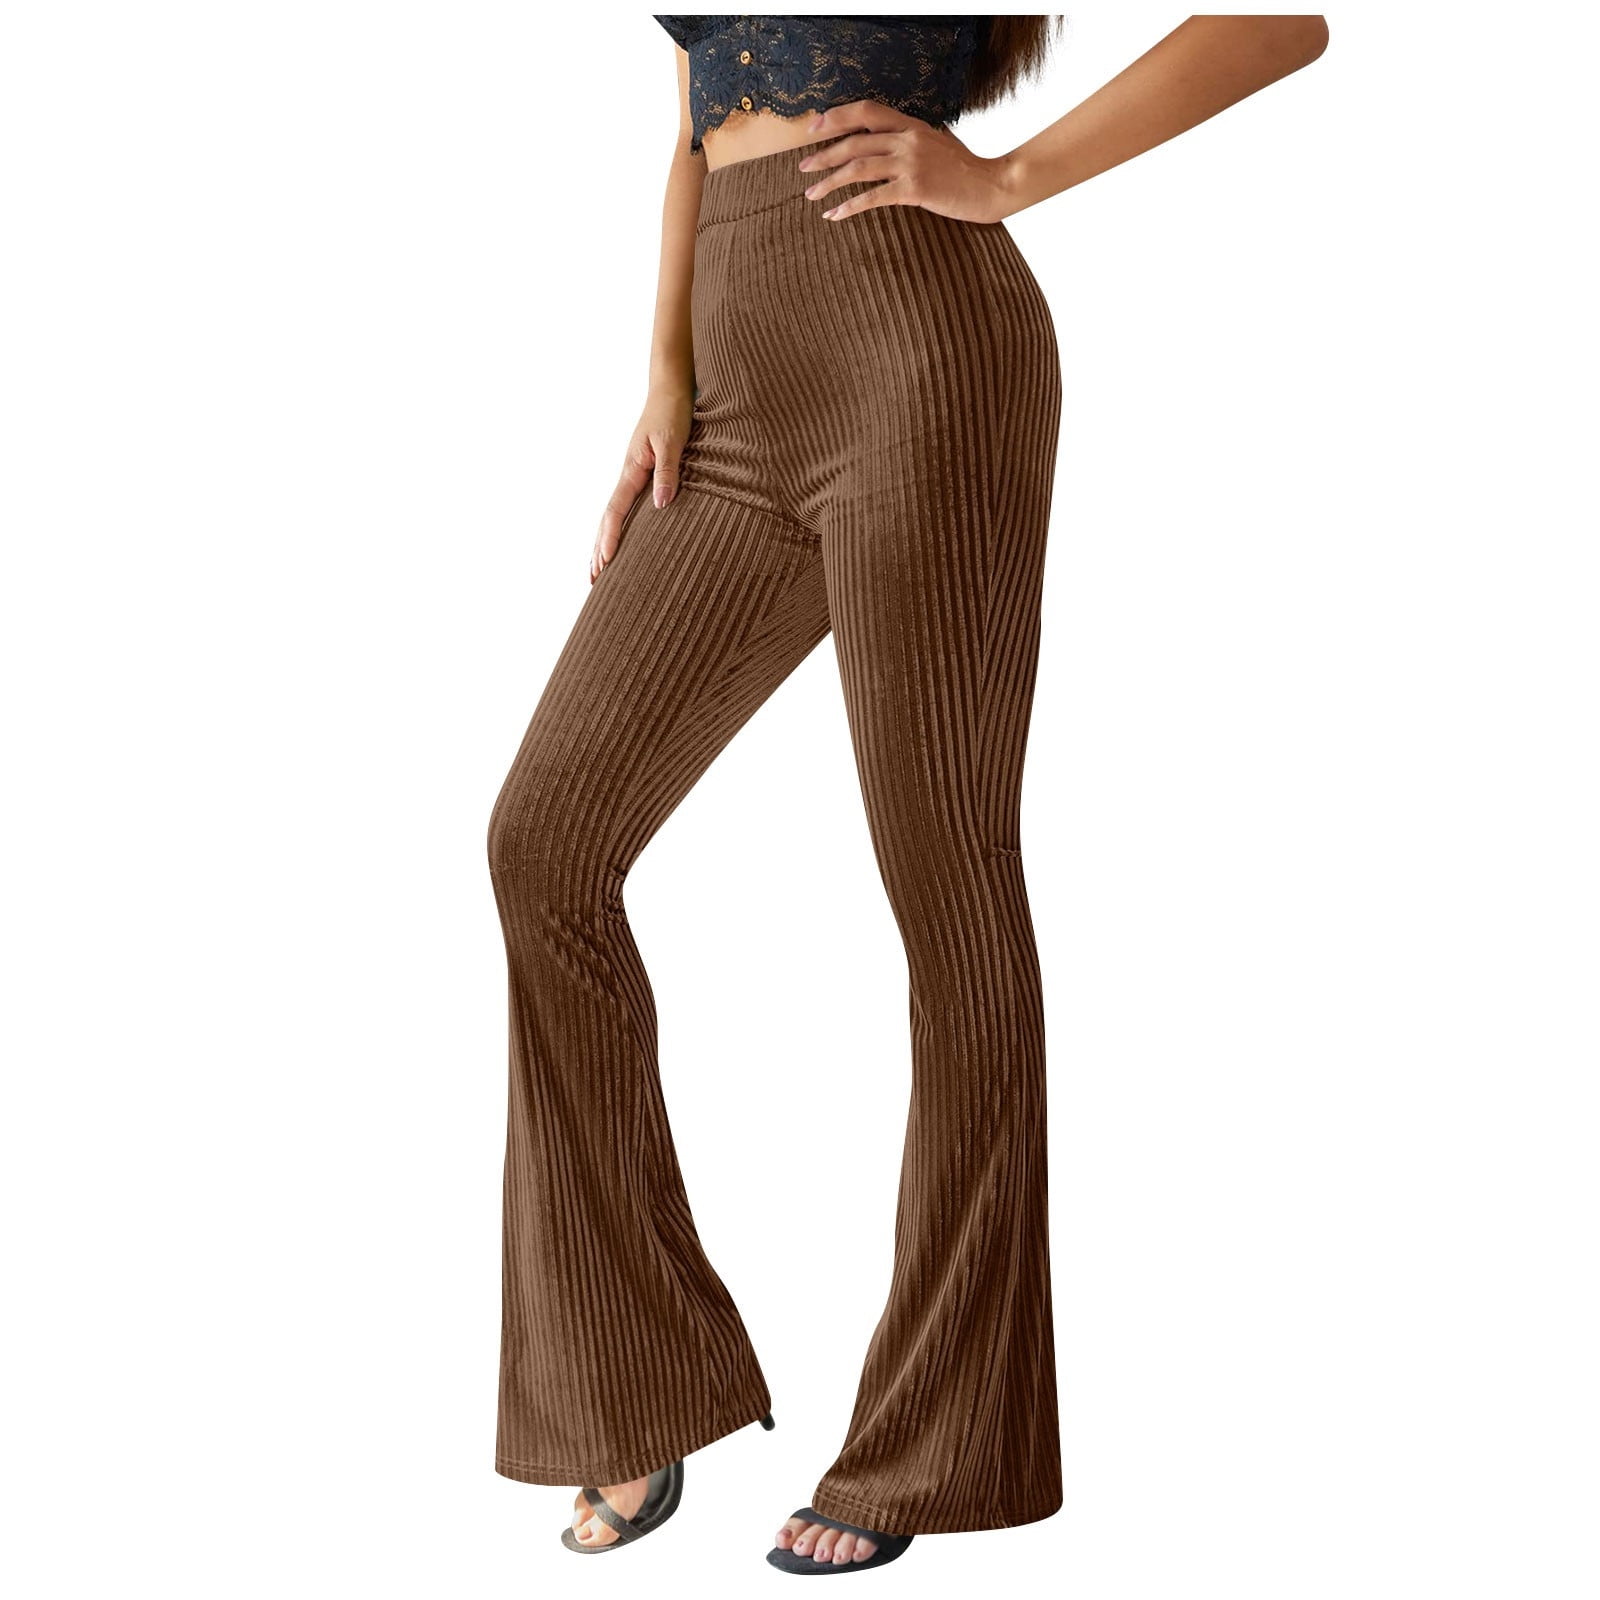 Owordtank Womens Bell Bottom Ribbed Pants Casual High Waist Flared Pants  Brown L